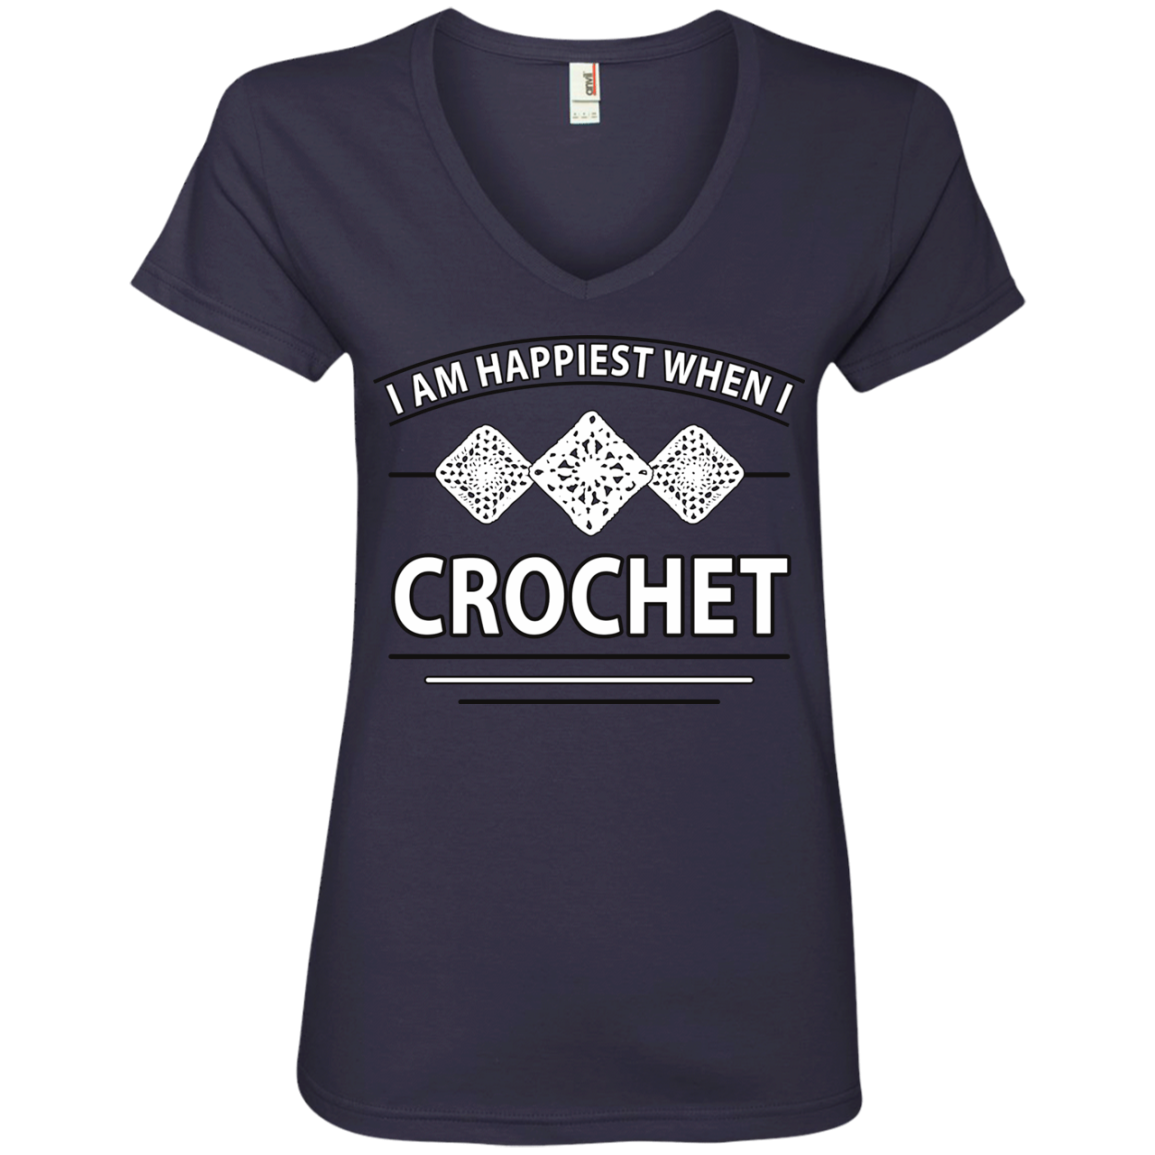 I Am Happiest When I Crochet Ladies V-neck Tee - Crafter4Life - 6